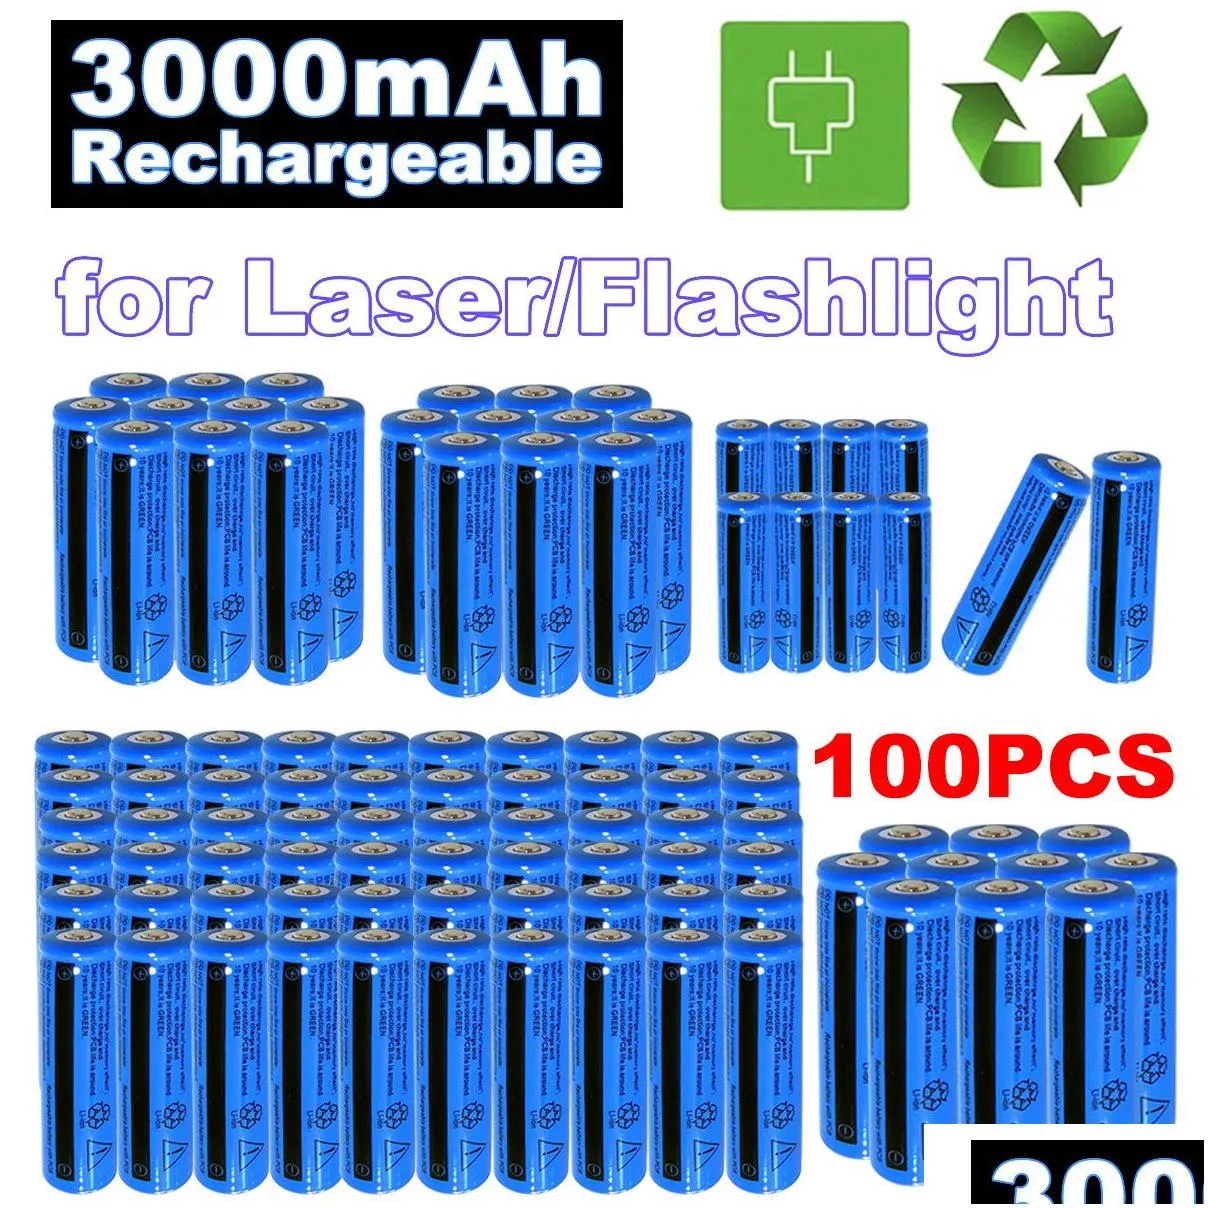 Batteries 100Pcs 3000Mah Rechargeable Battery 3.7V Brc Li-Ion Not Aaa Or Aa For Flashlight Torch Laser Pen Drop Delivery Electronics B Dhyw8